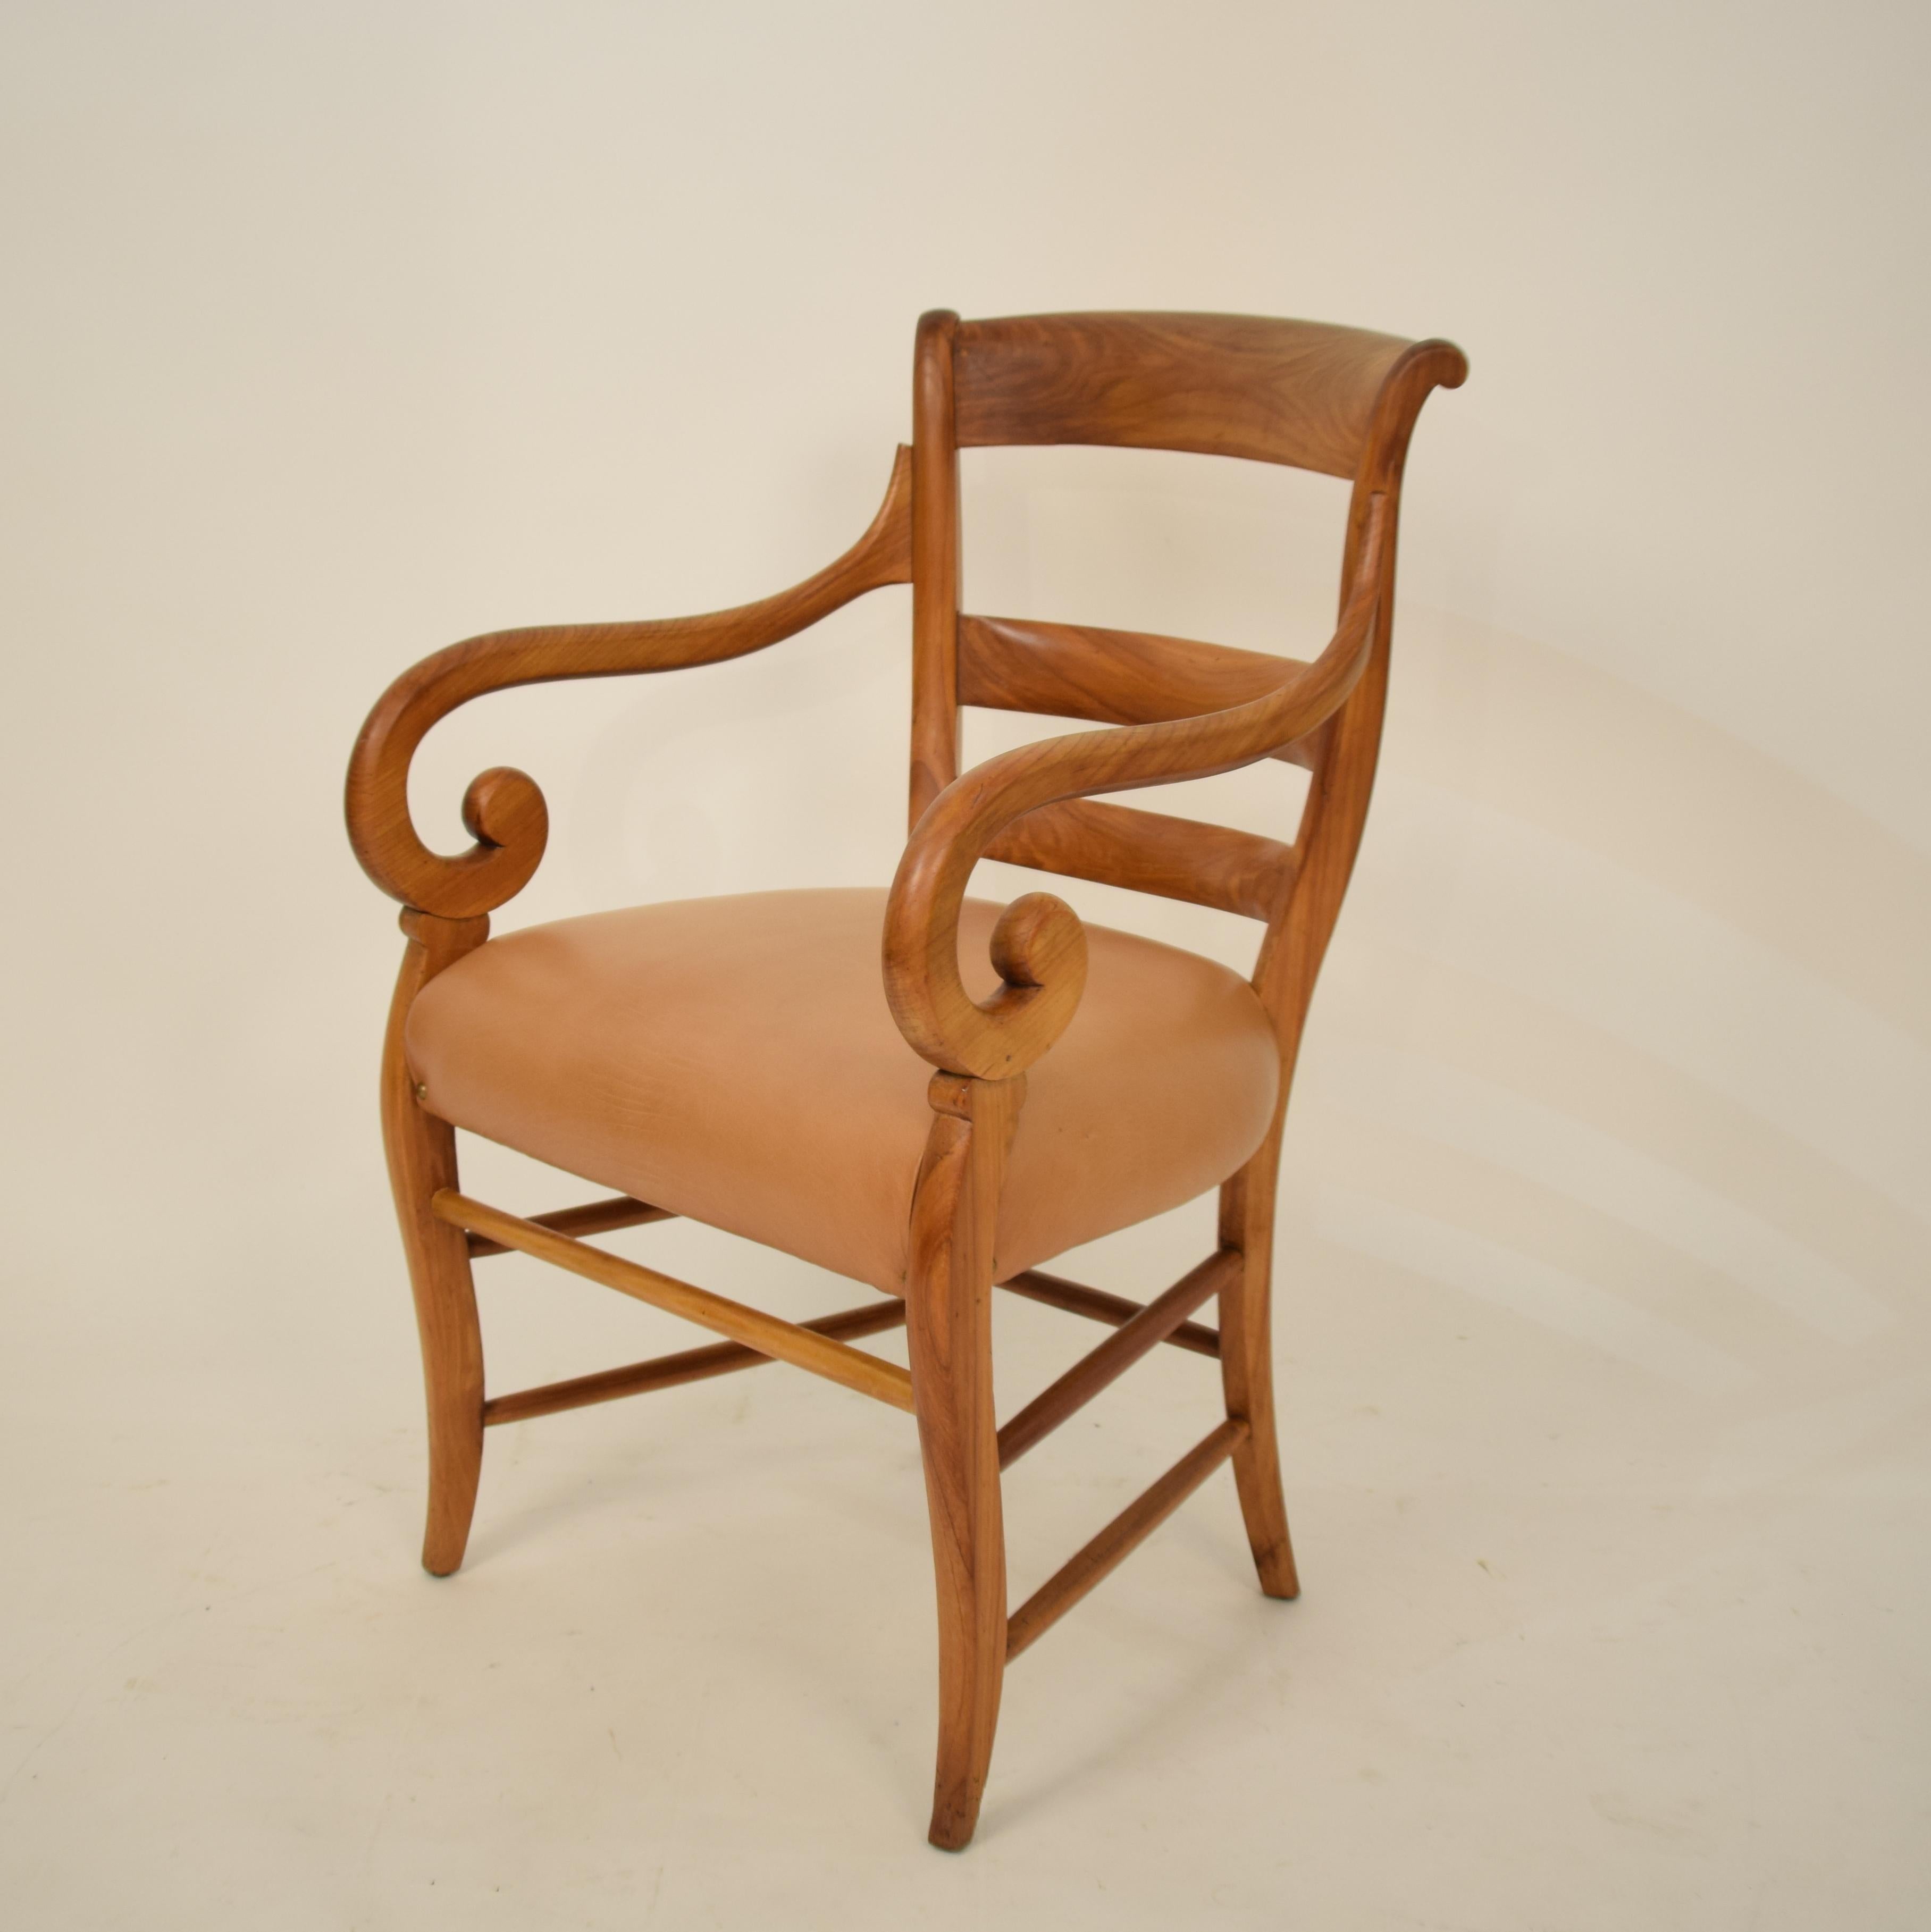 This 19th century German Biedermeier armchair was made in the 1920s. It is made out of solid cherry wood and the seat is reupholstered with brown / cognac leather.
A unique piece which is a great eye-catcher for your antique, modern, space age or